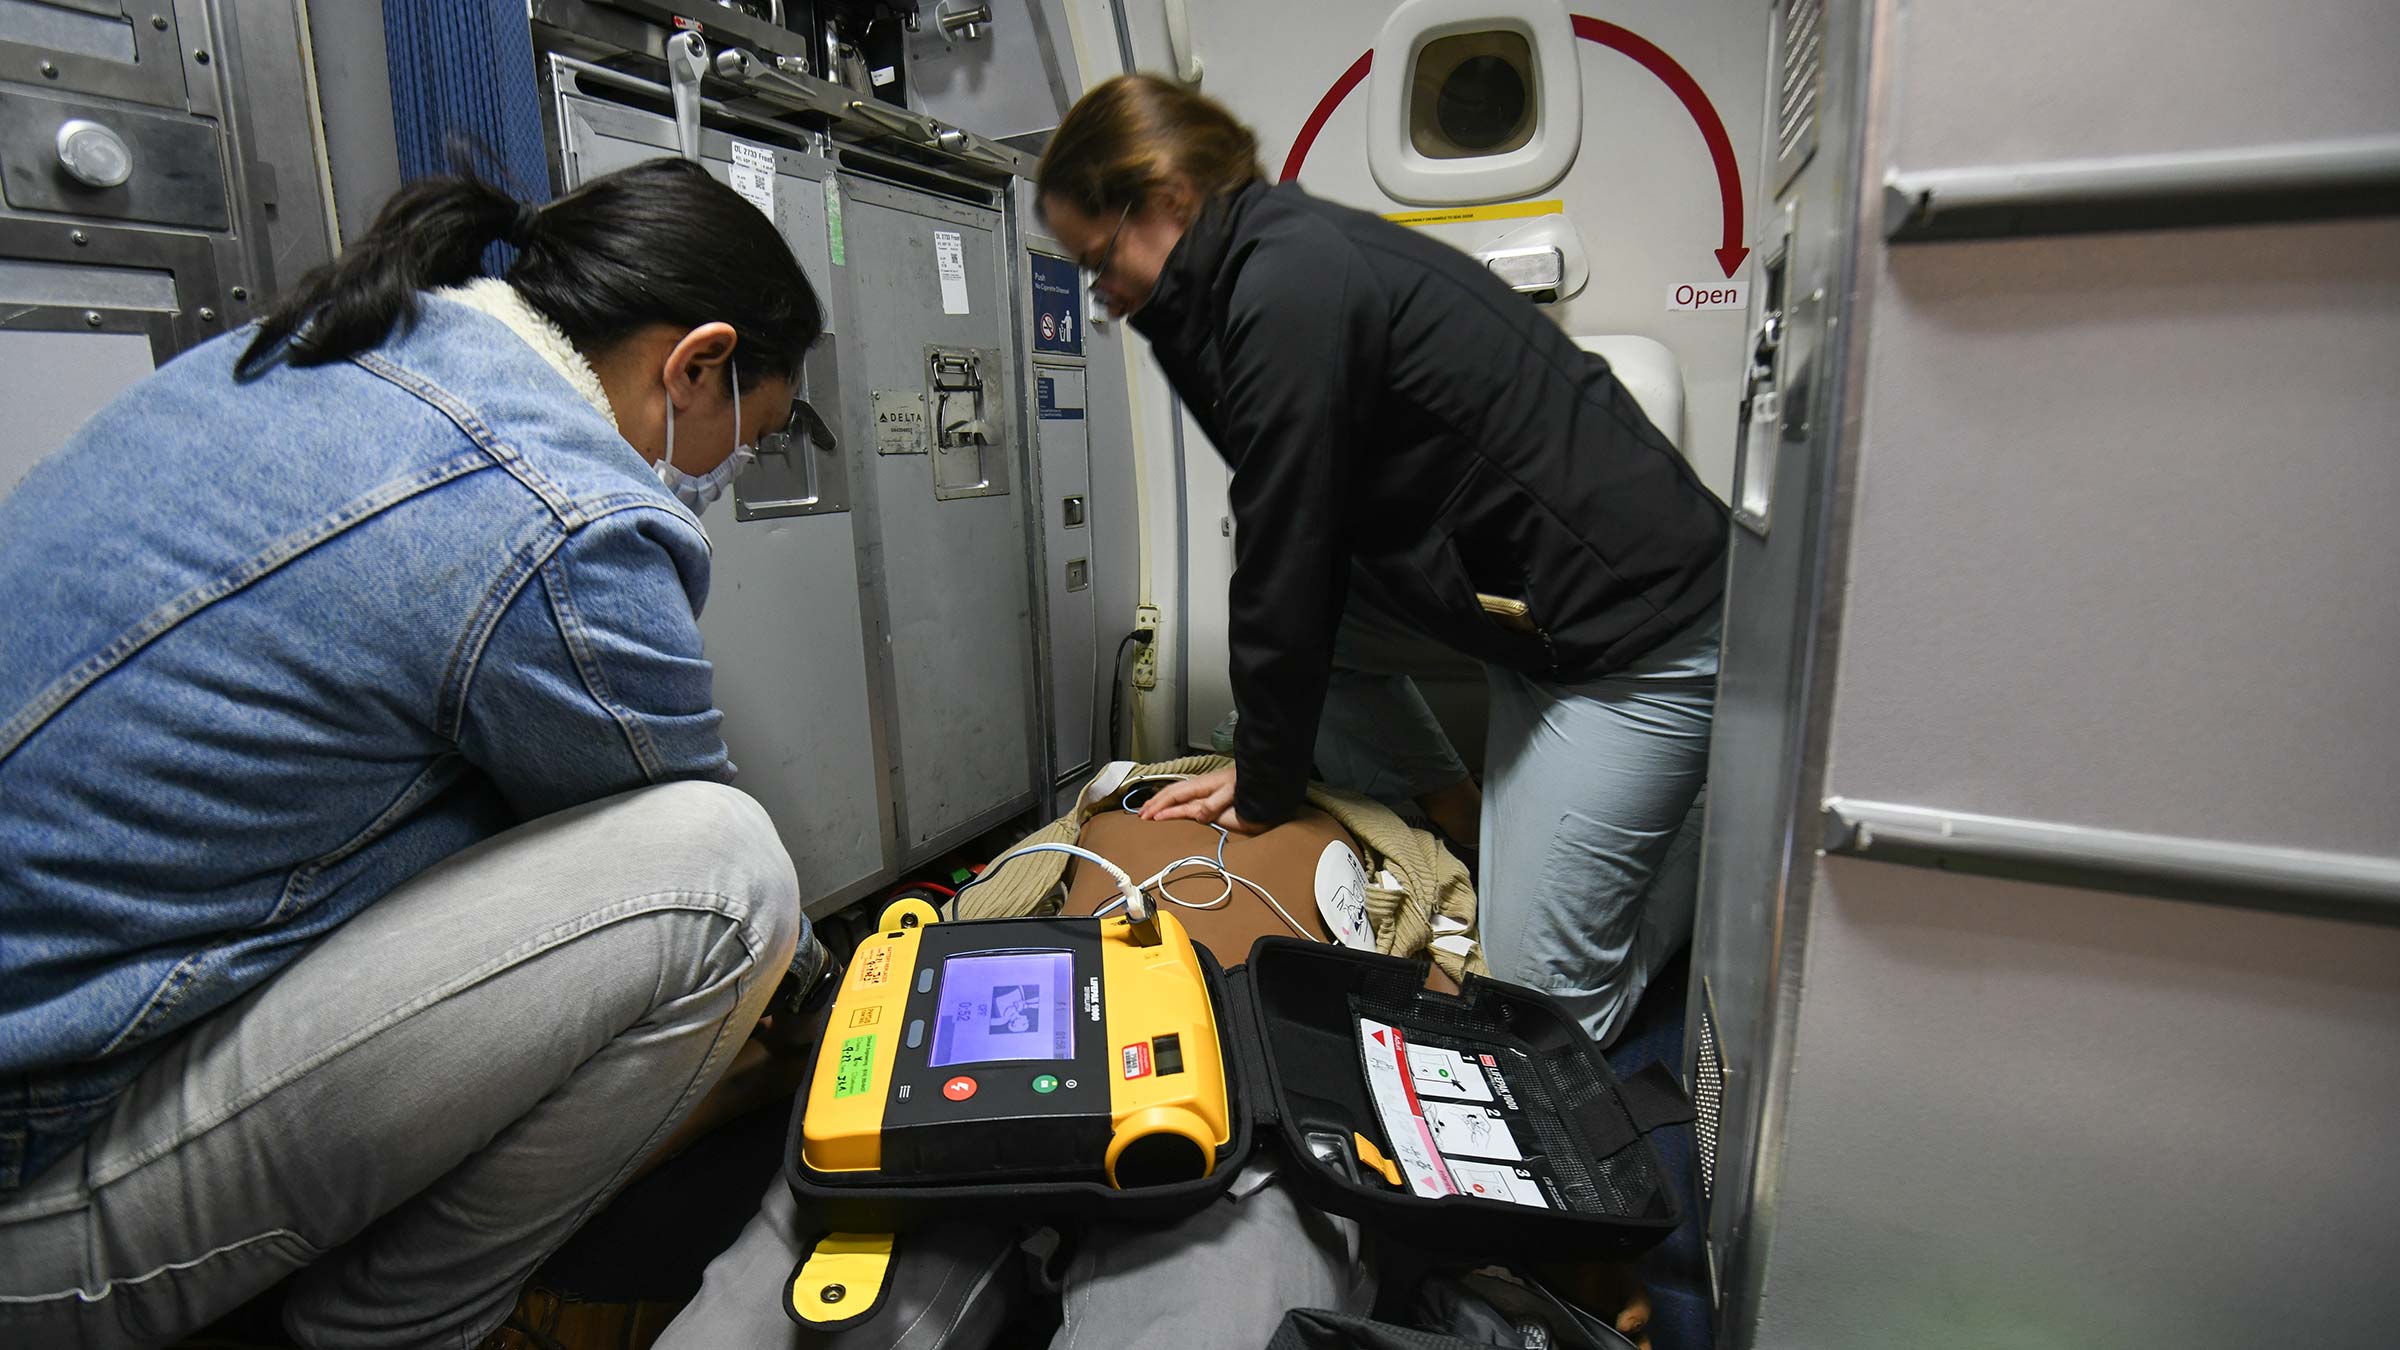 Students practicing CPR in an airplane